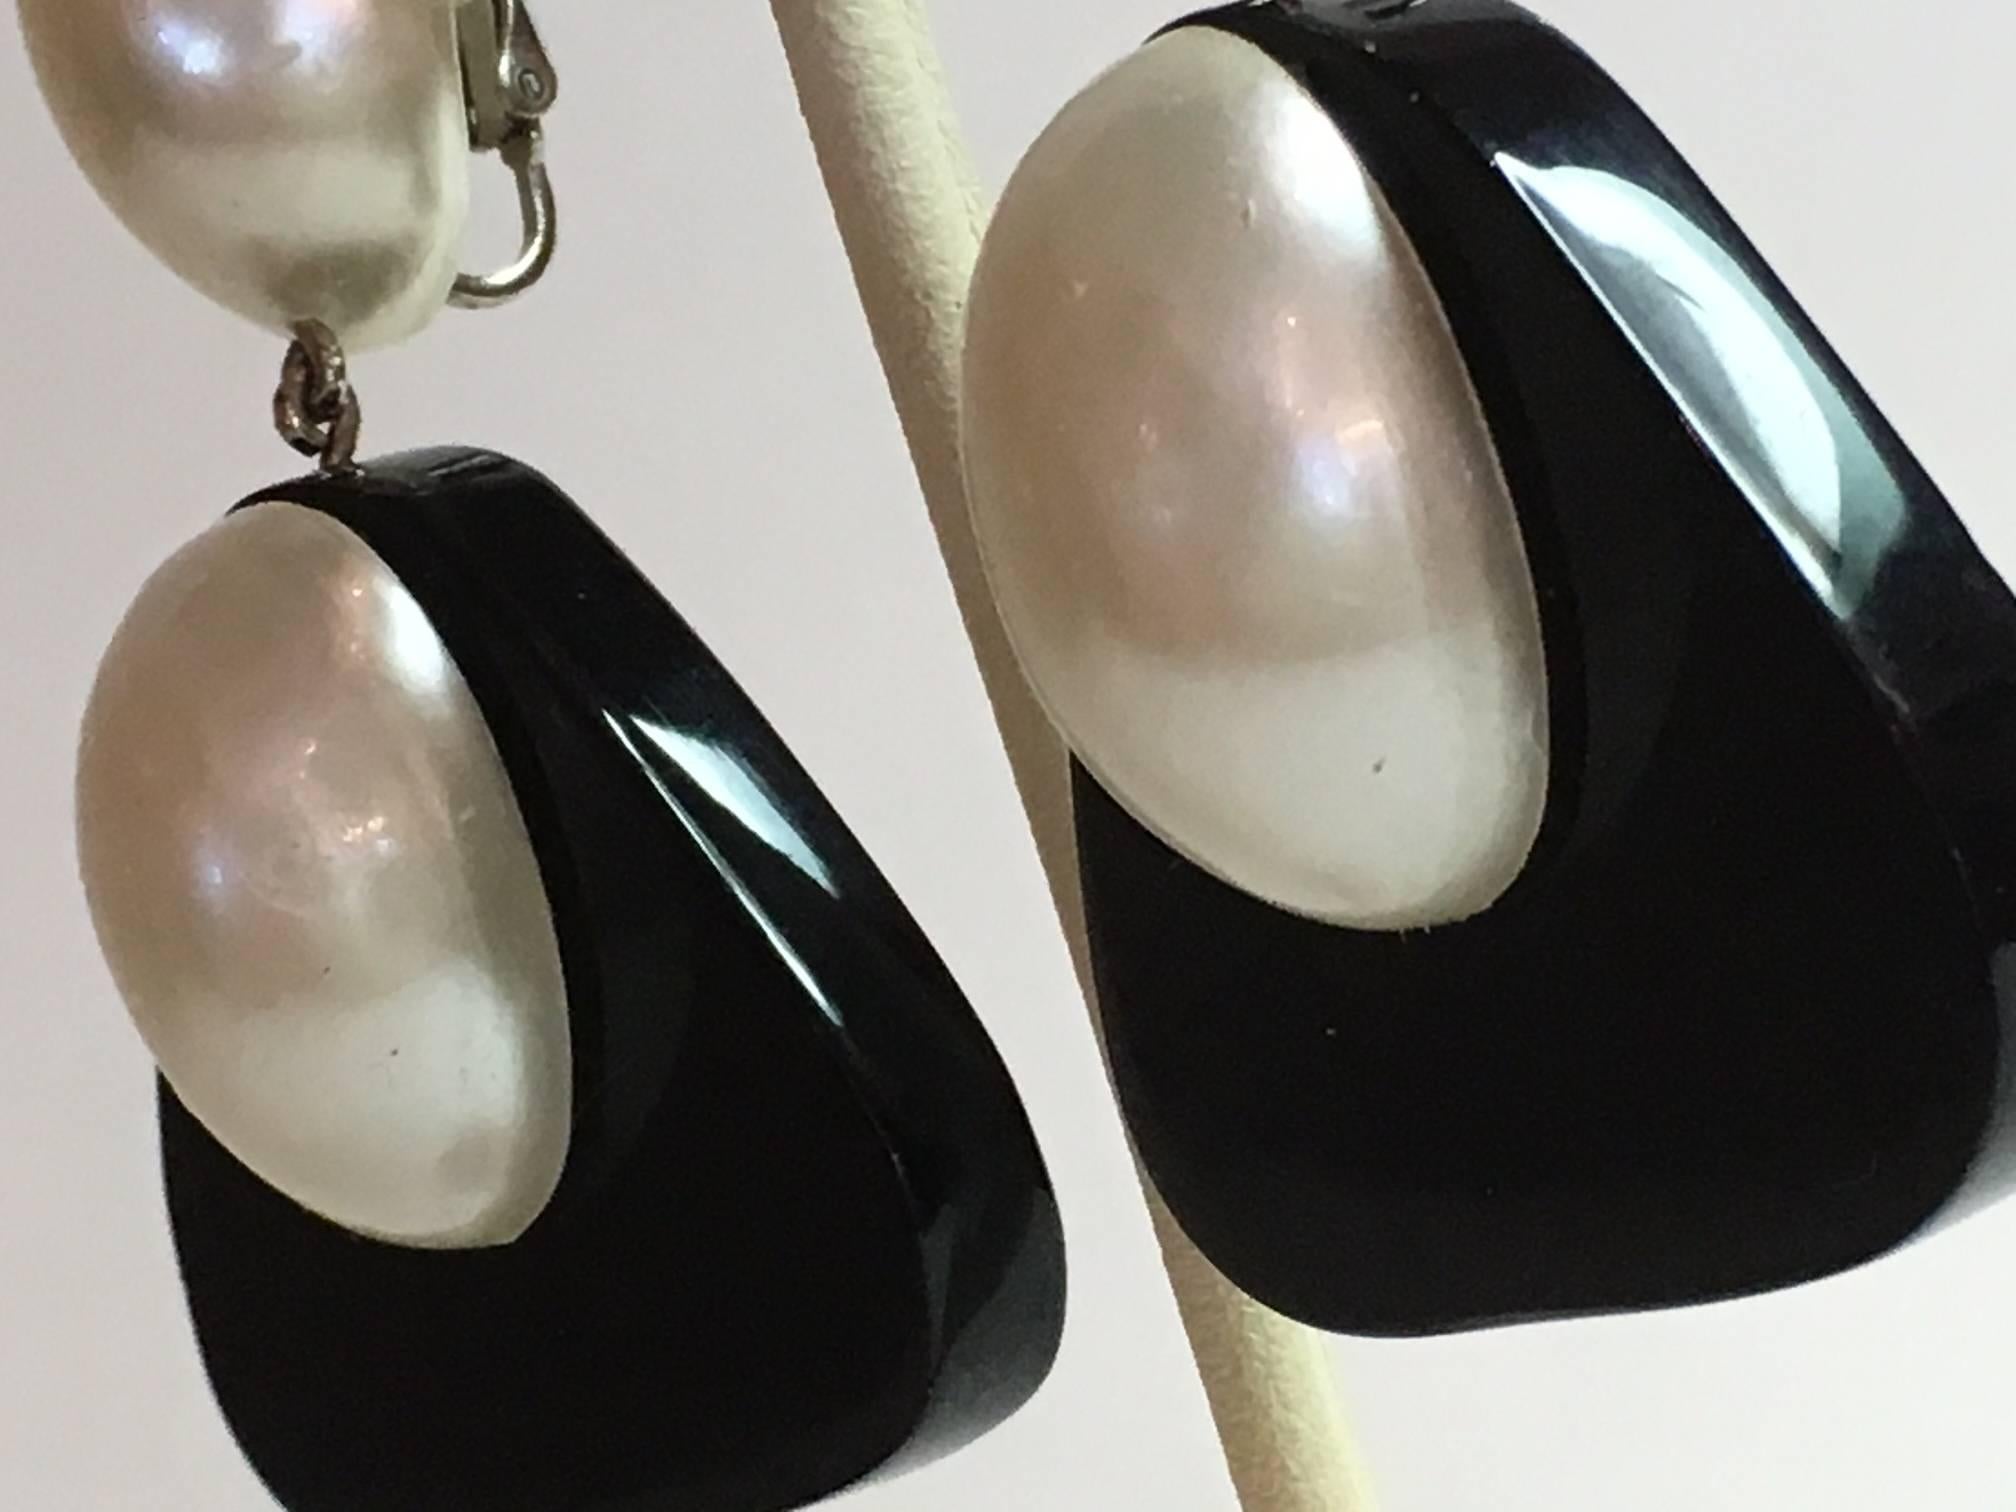 These lovely fingernail pearl style earrings in black acrylic with oval pearl accents, Fingernail domed pearl top element suspend rounded triangular black acrylic drops with additional pearl domed set accents.. The  tops are under 1